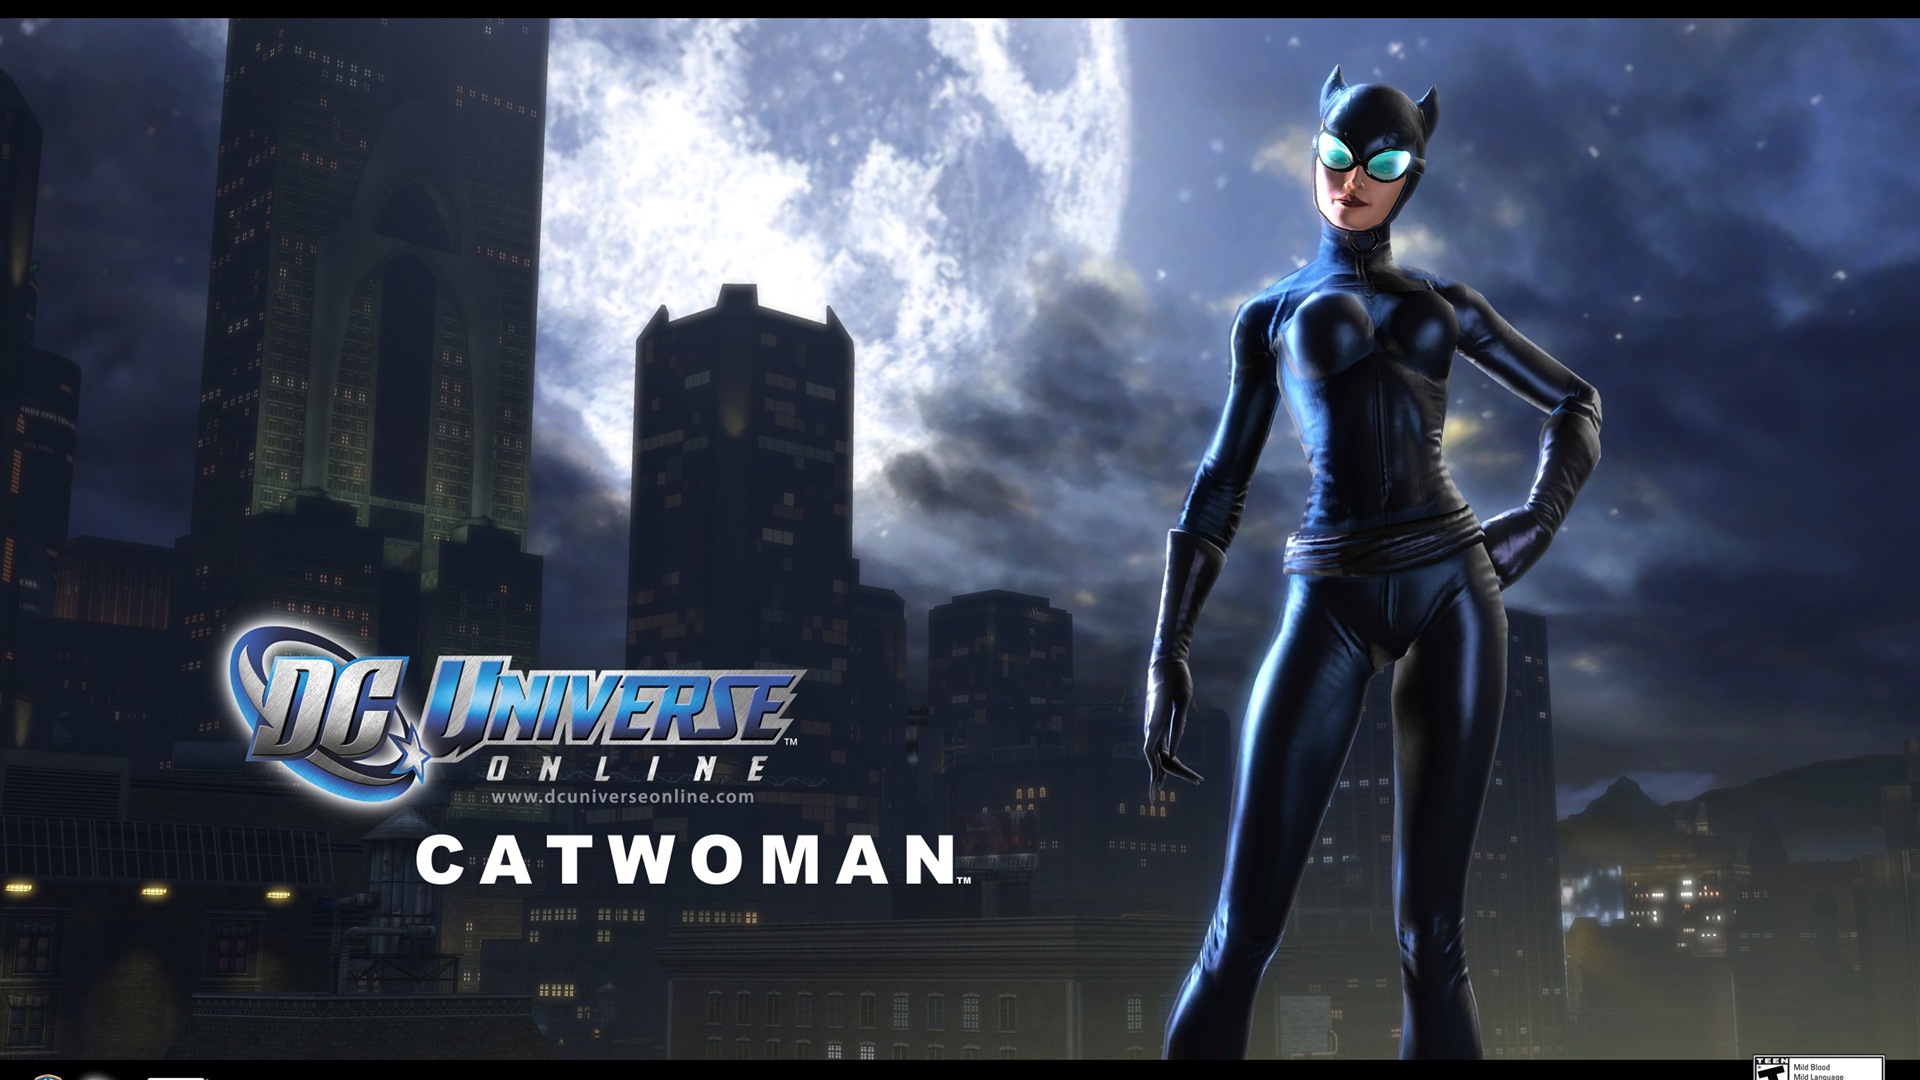 DC Universe Online HD game wallpapers #14 - 1920x1080